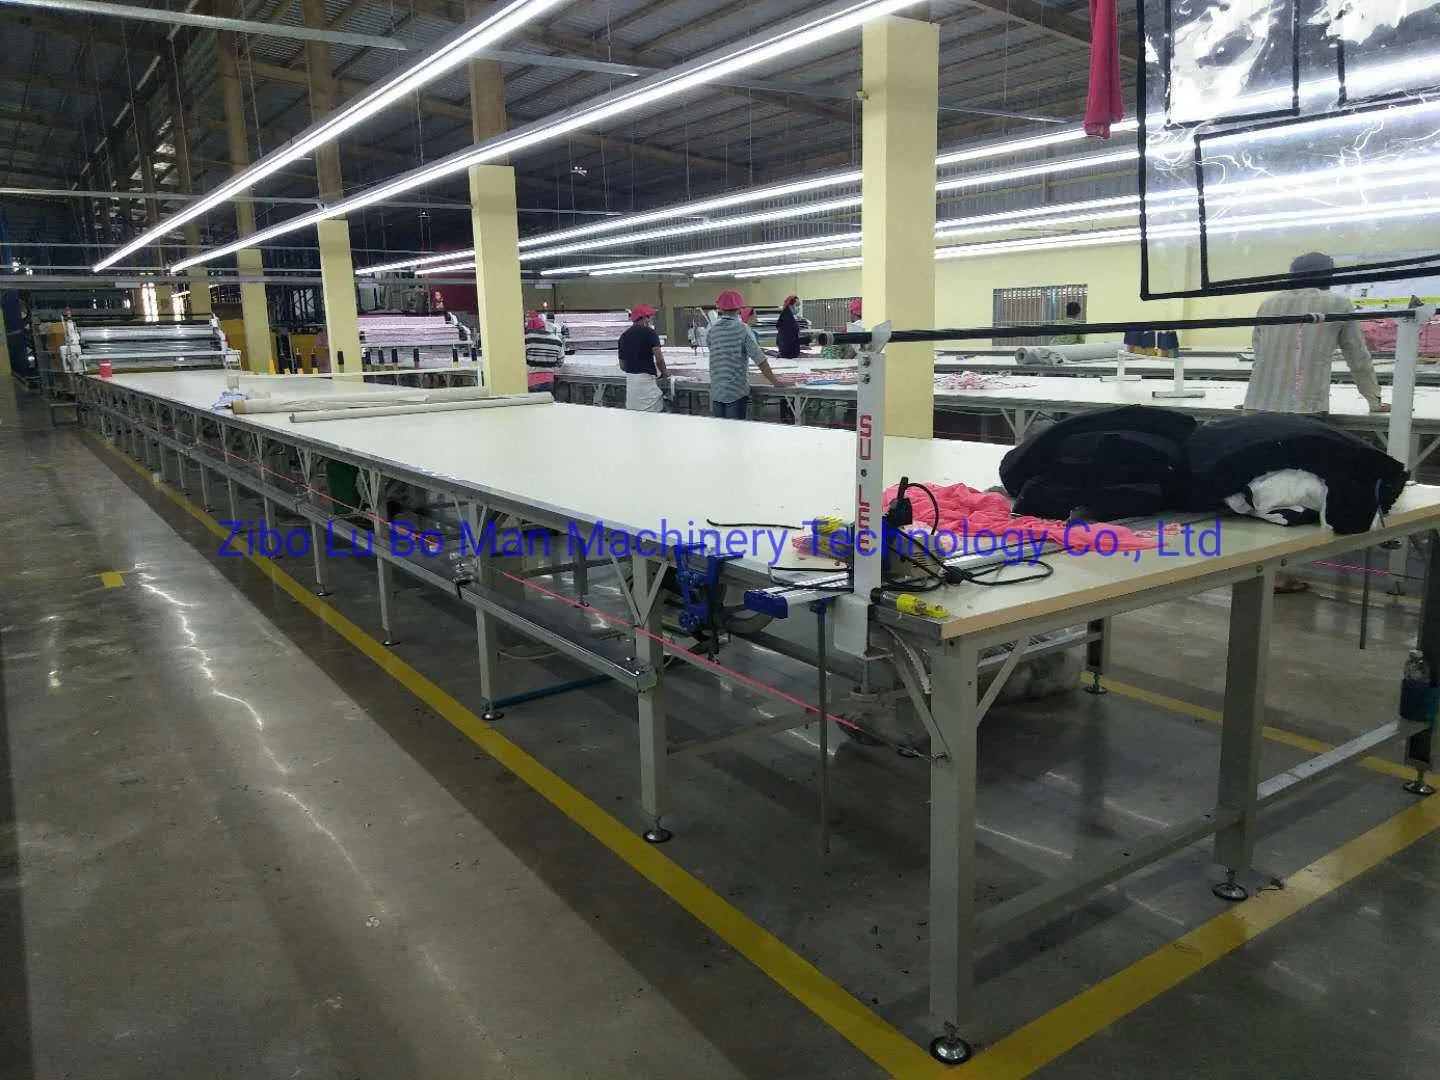 Custom-Made Industrial Fabric Spreading Cutting Ttable for Garment Factory